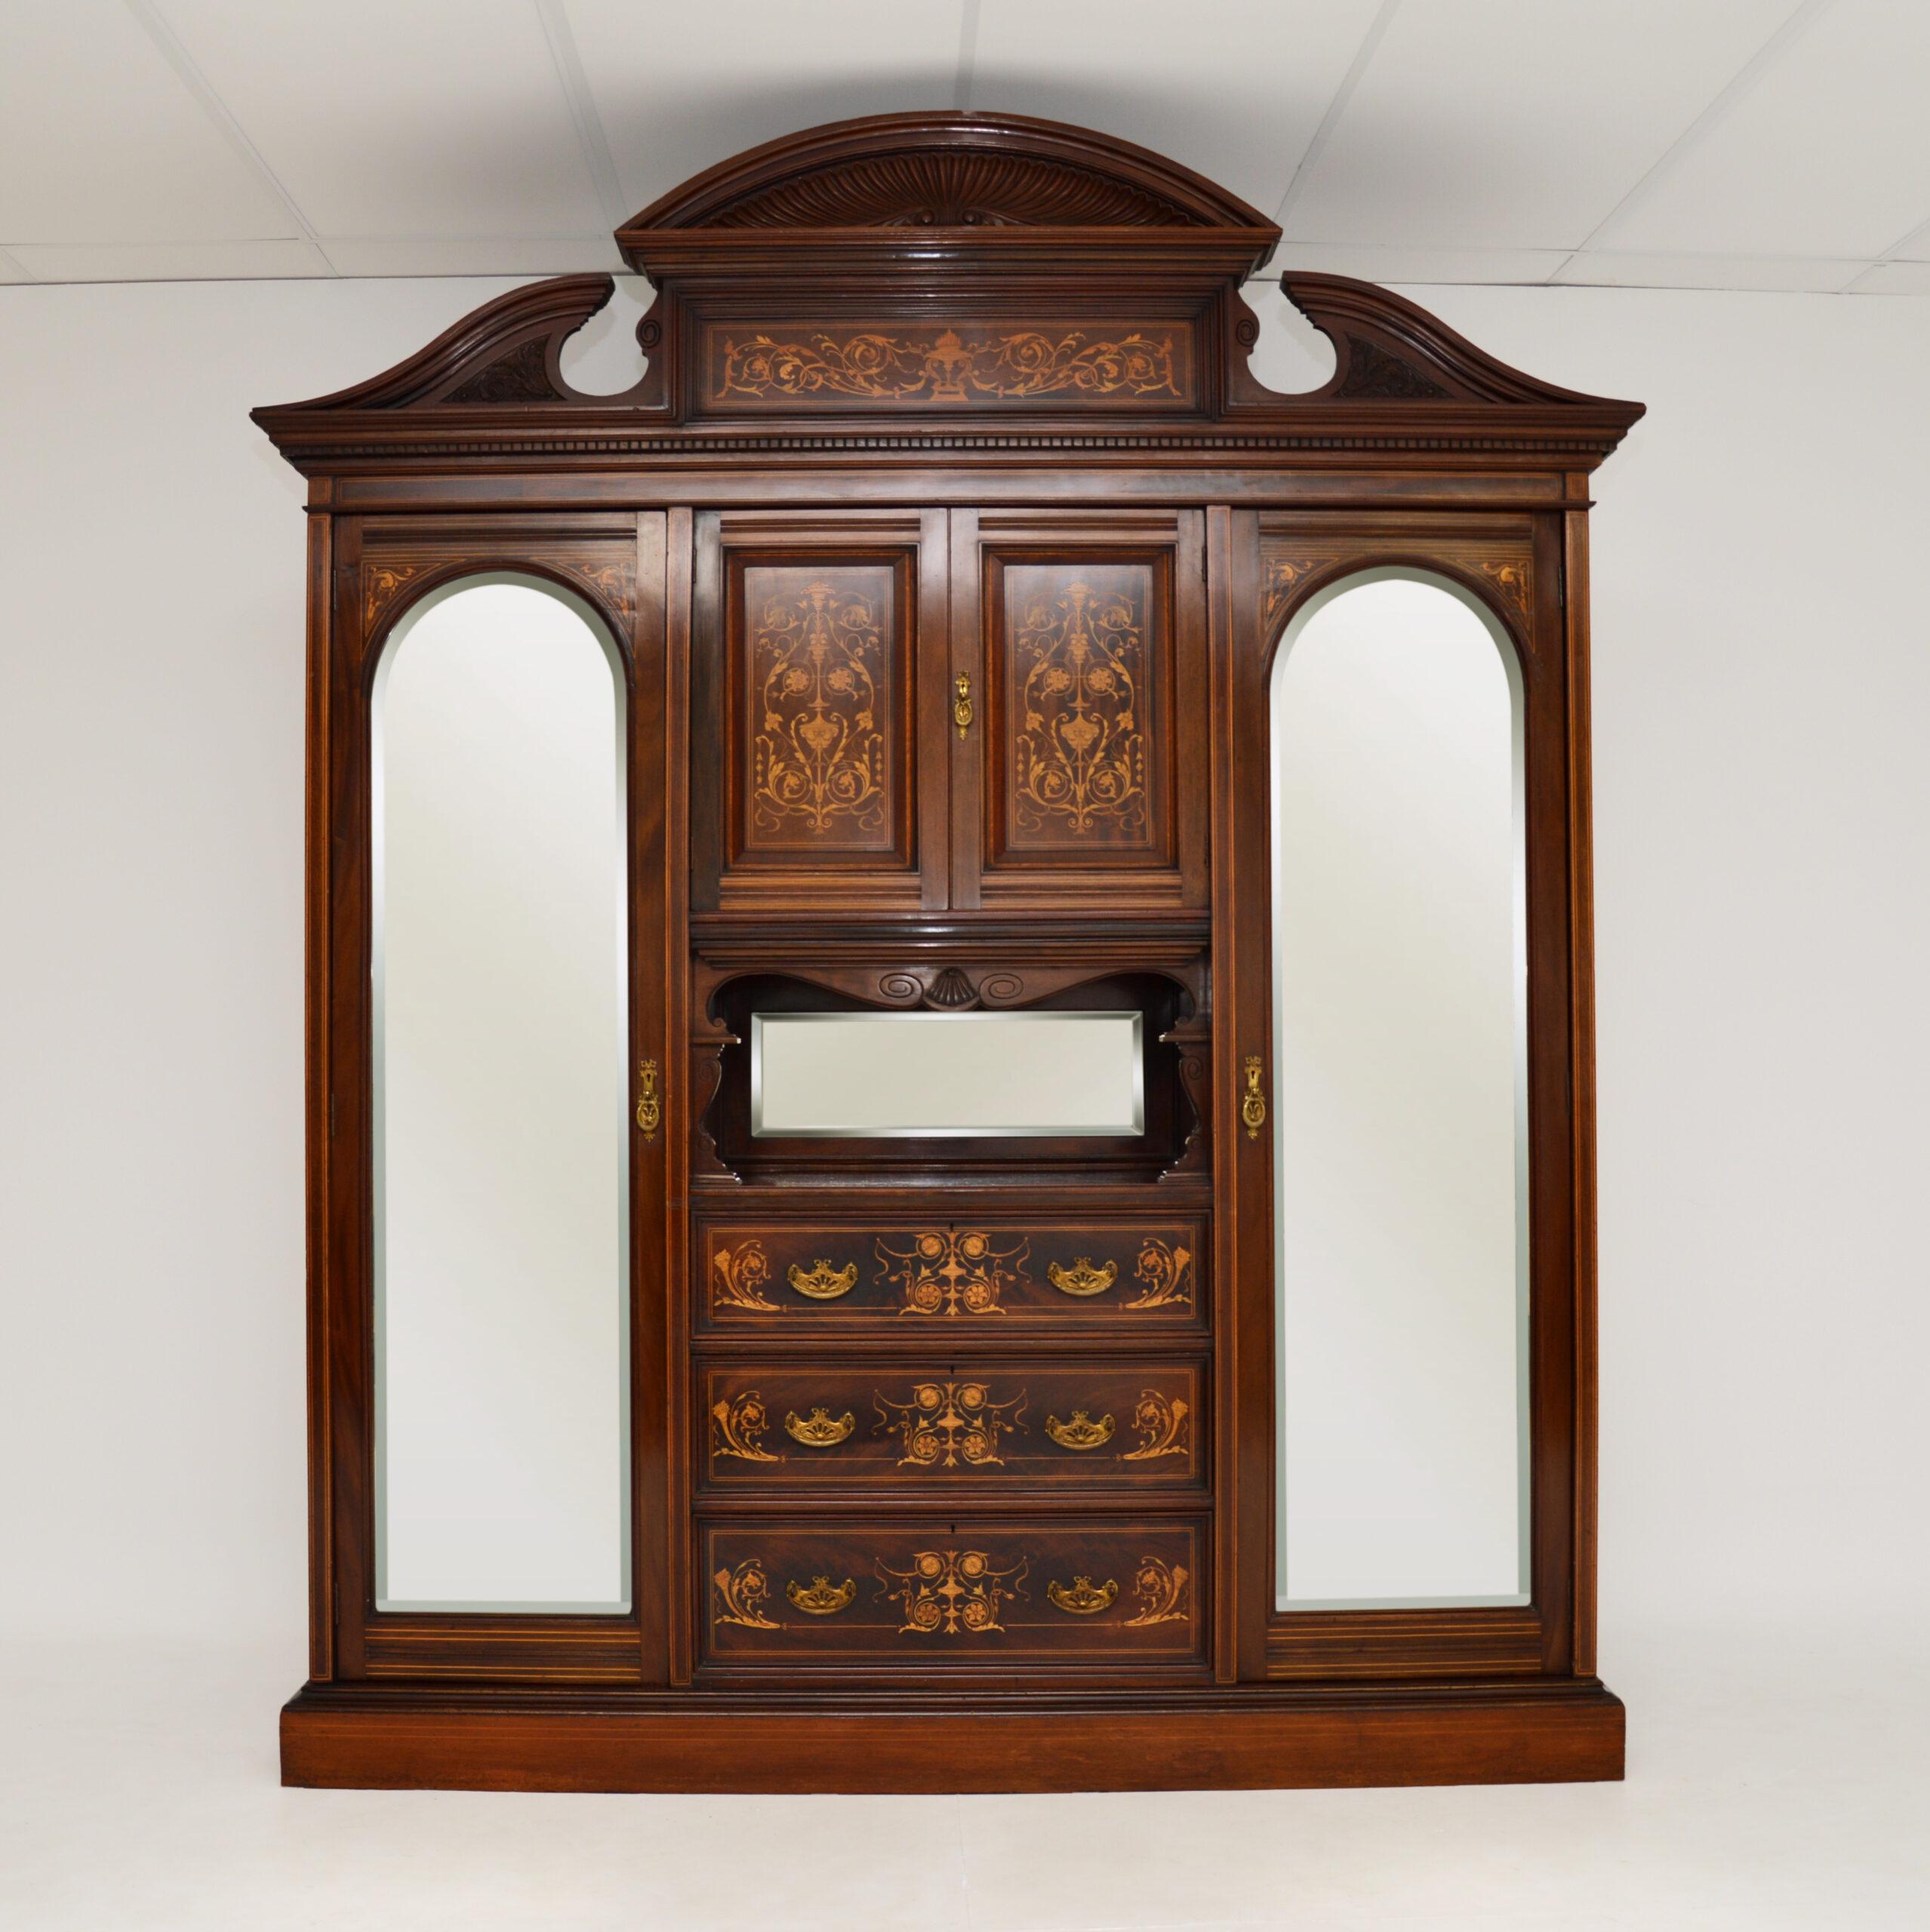 A magnificent antique Victorian wardrobe of the finest quality, this really is one of the most amazing wardrobes we have ever had. It was made in England by James Shoolbred & co, it dates from the 1880-1890 period.
It is extremely well made from